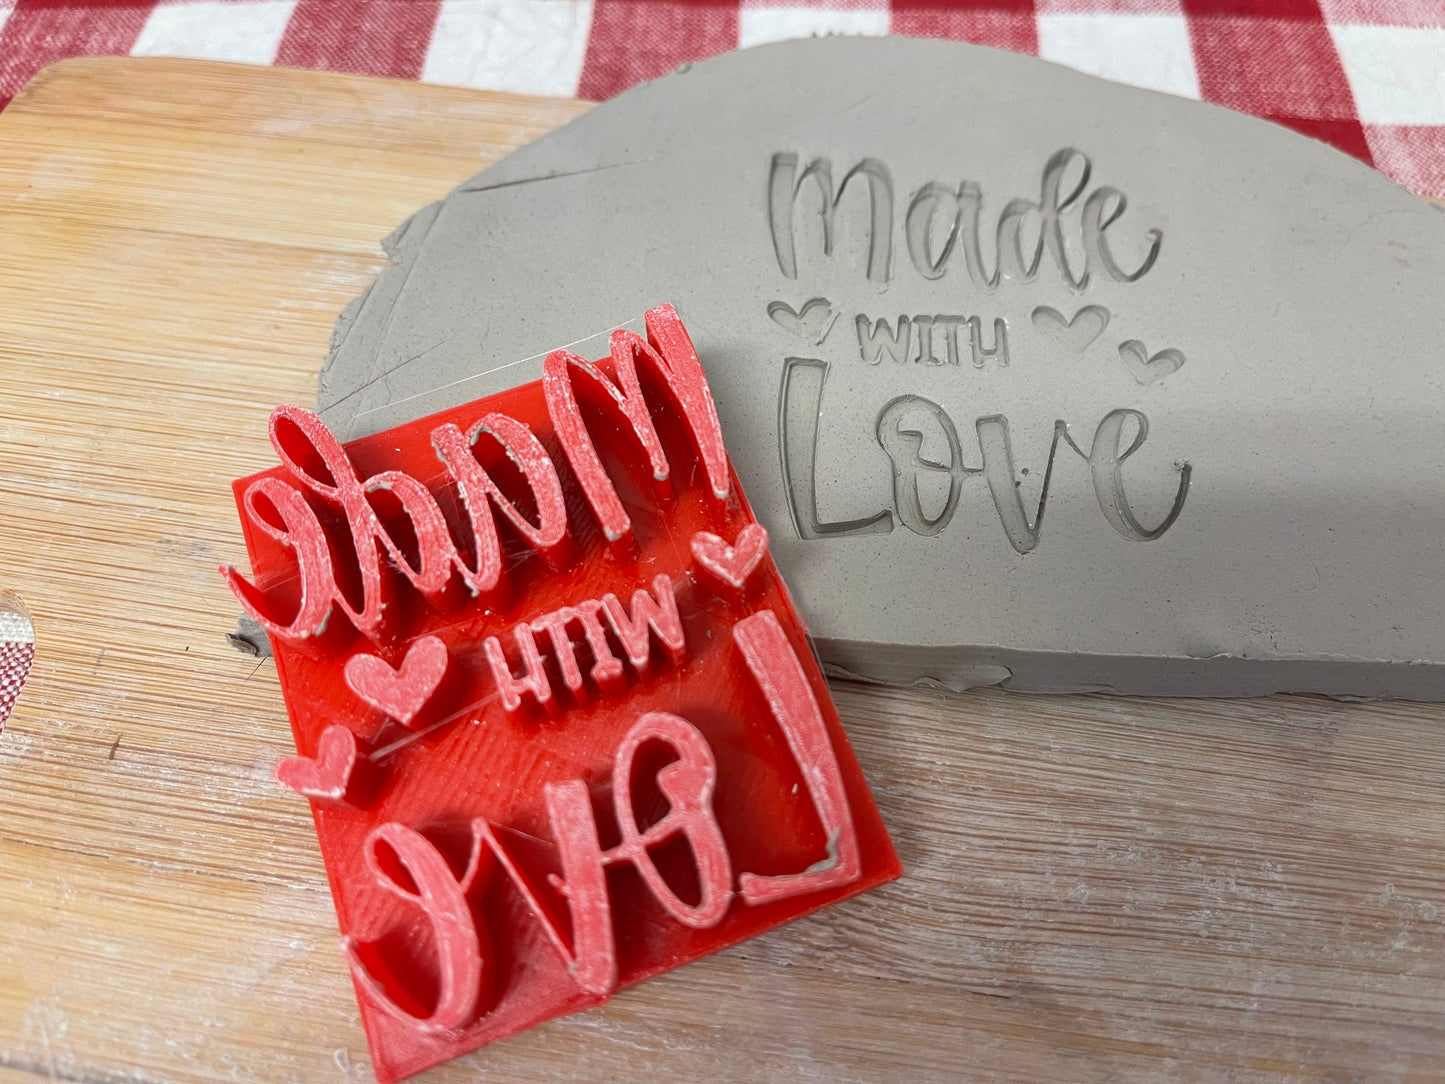 "Made with Love" word stamp - plastic 3D Printed, Multiple Sizes Available